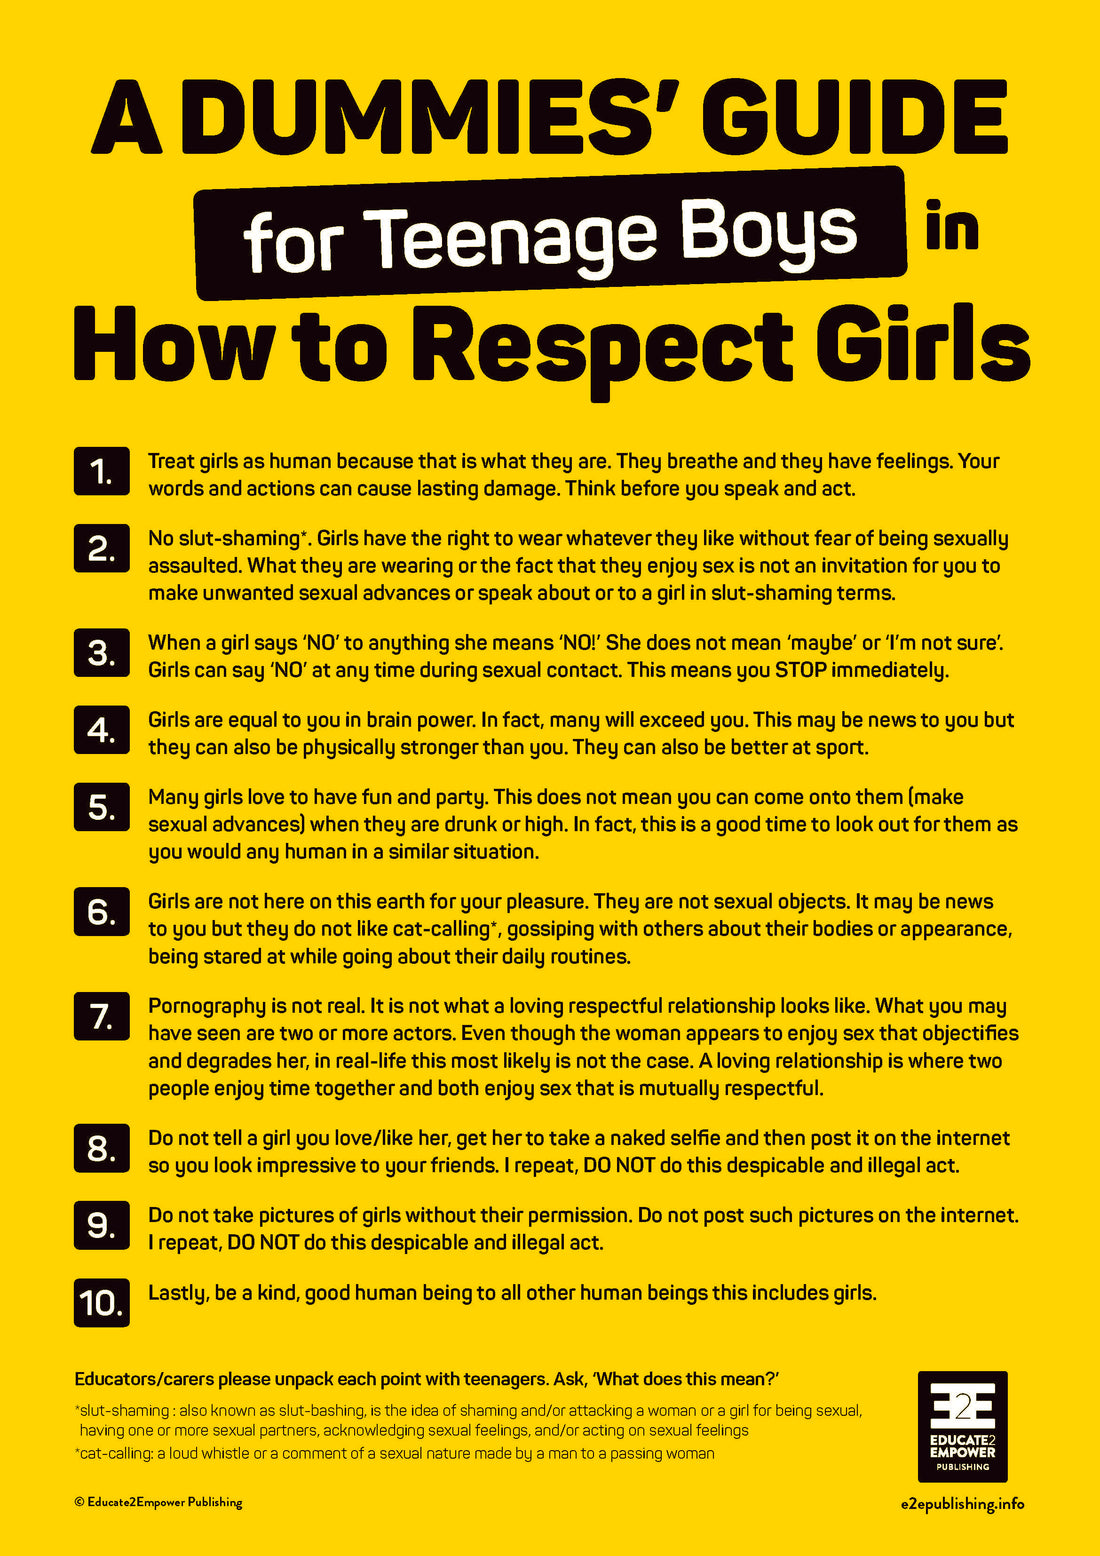 A DUMMIES’ Guide for Teenage Boys in How to Respect Girls